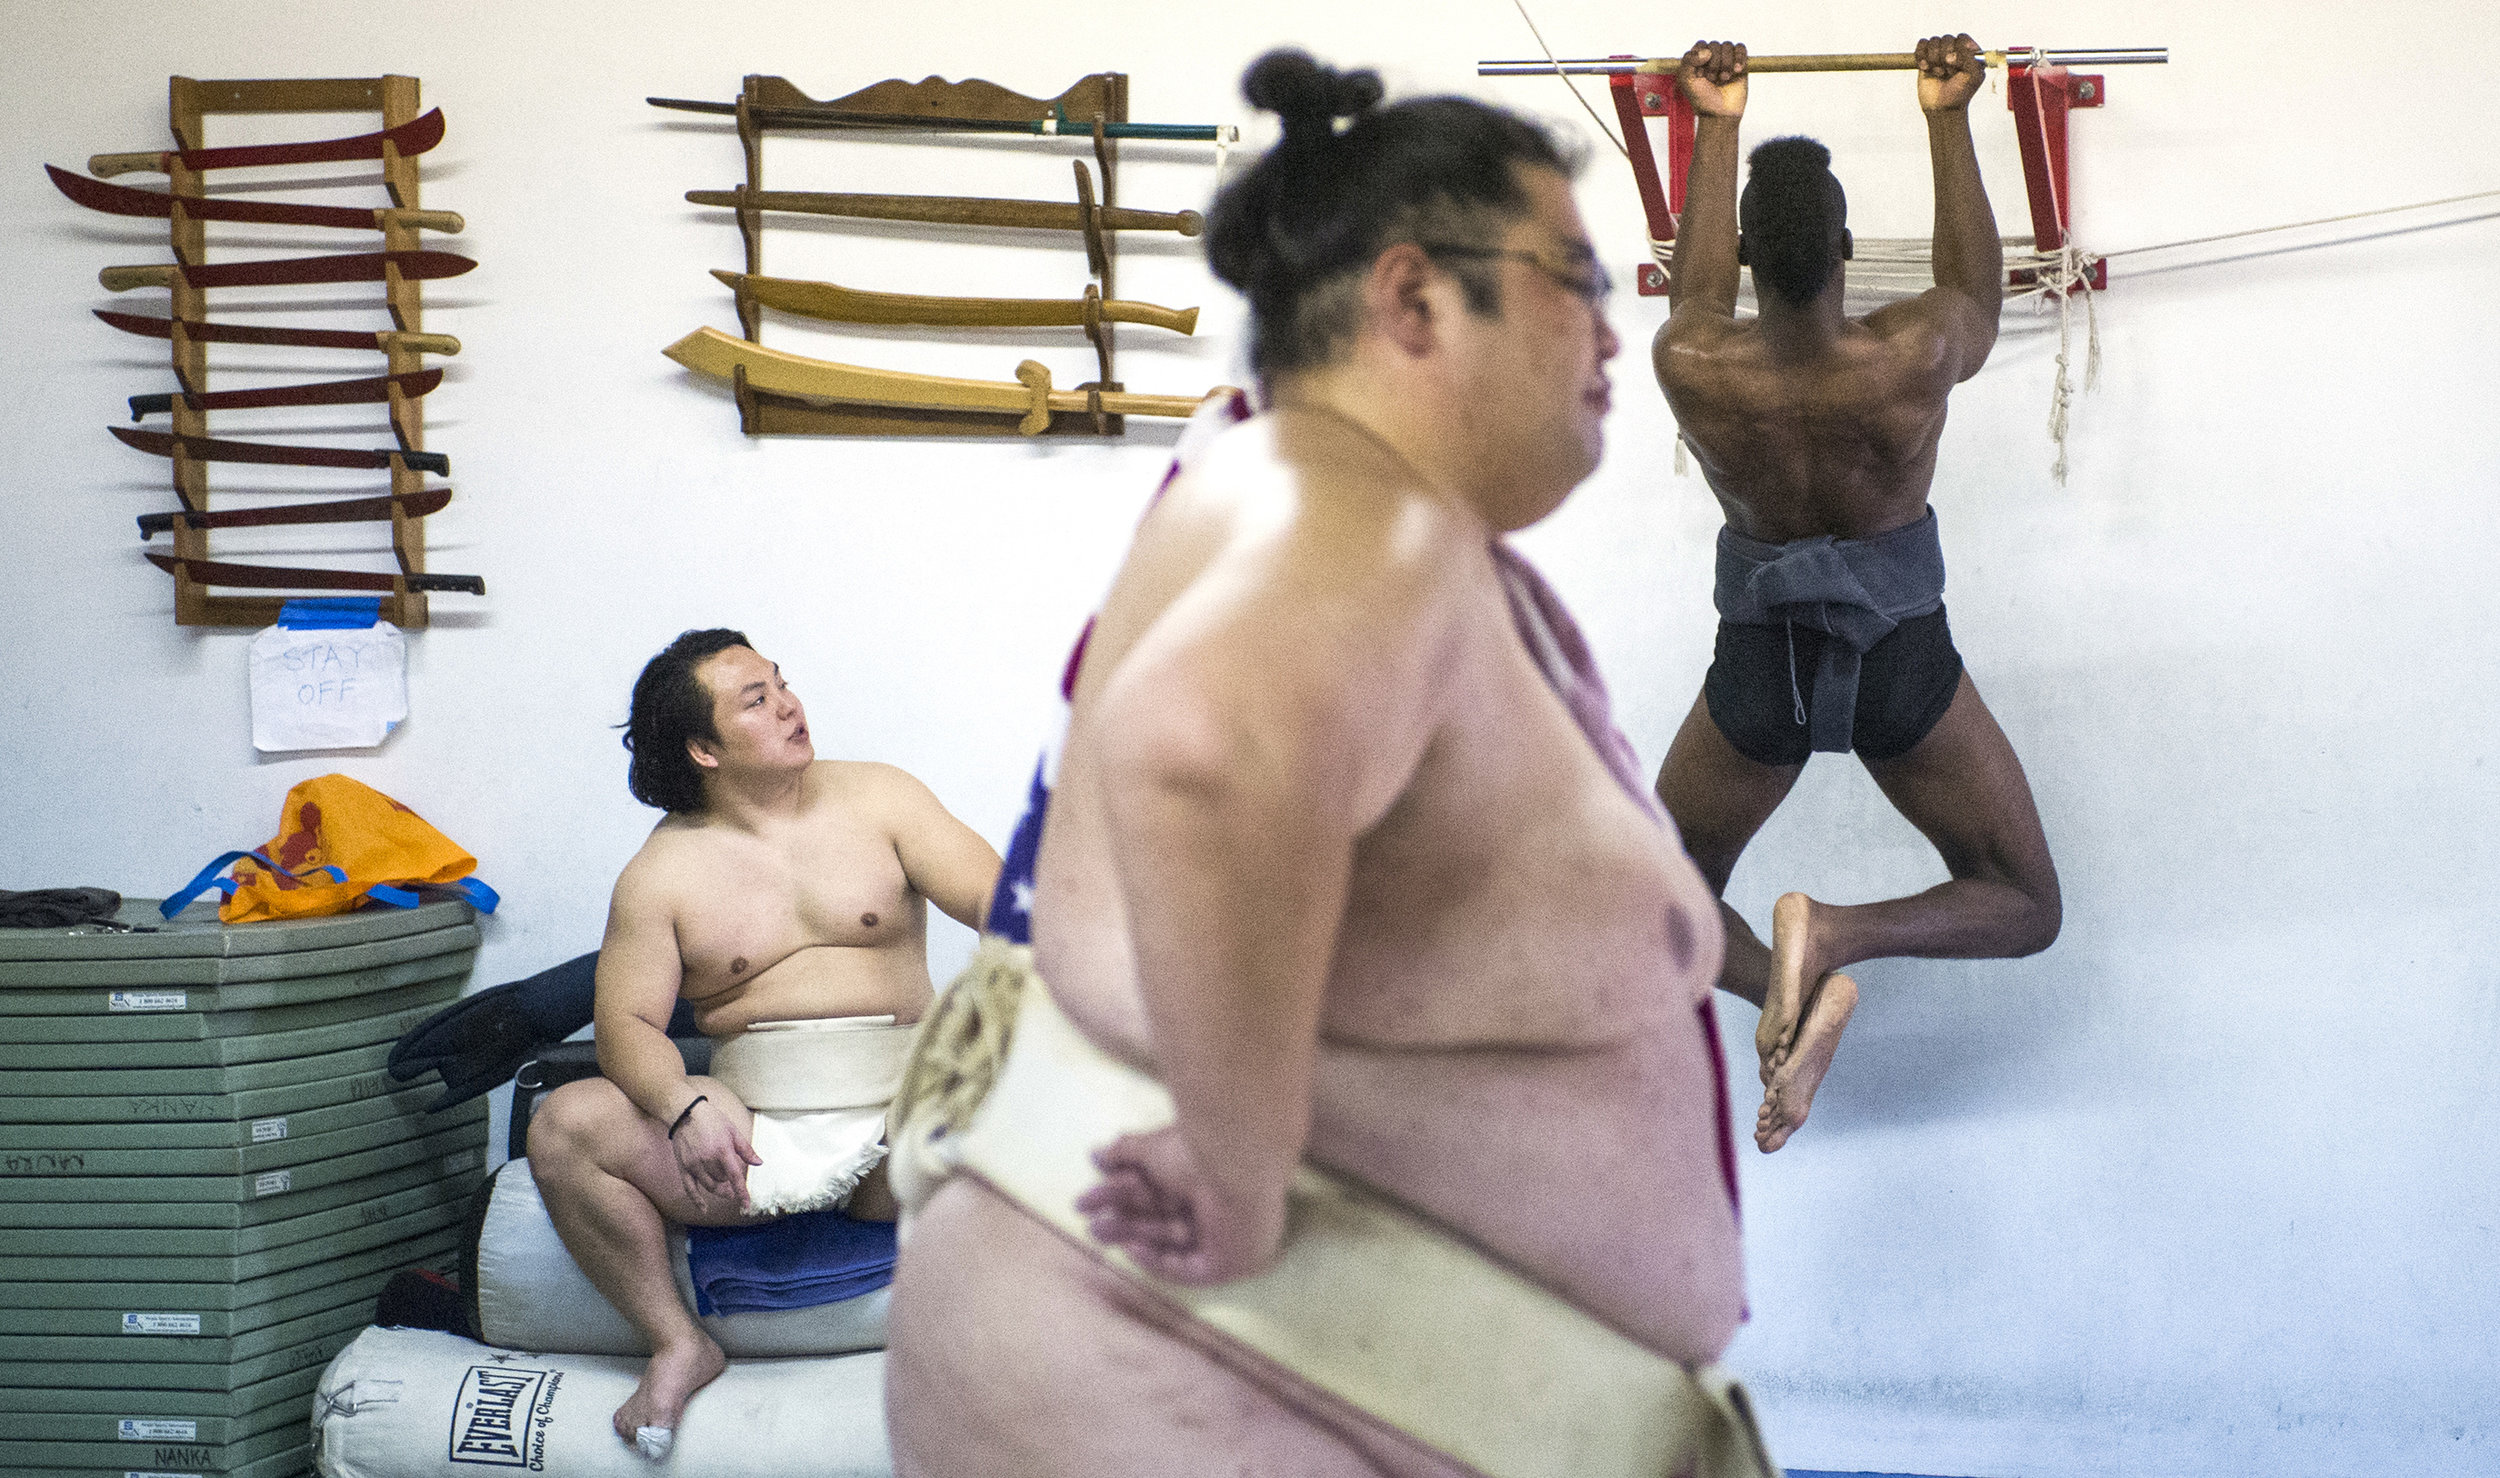  Two-time World Sumo Champion Yamamotoyama or Yama, center, watches the sumo ring as Compton native Phillip "Monster" Barnes, of Compton, do pull-ups and  Takeshi Amitani, of Japan, looks on during a sumo wrestling practice in Carson Sunday, April 8,